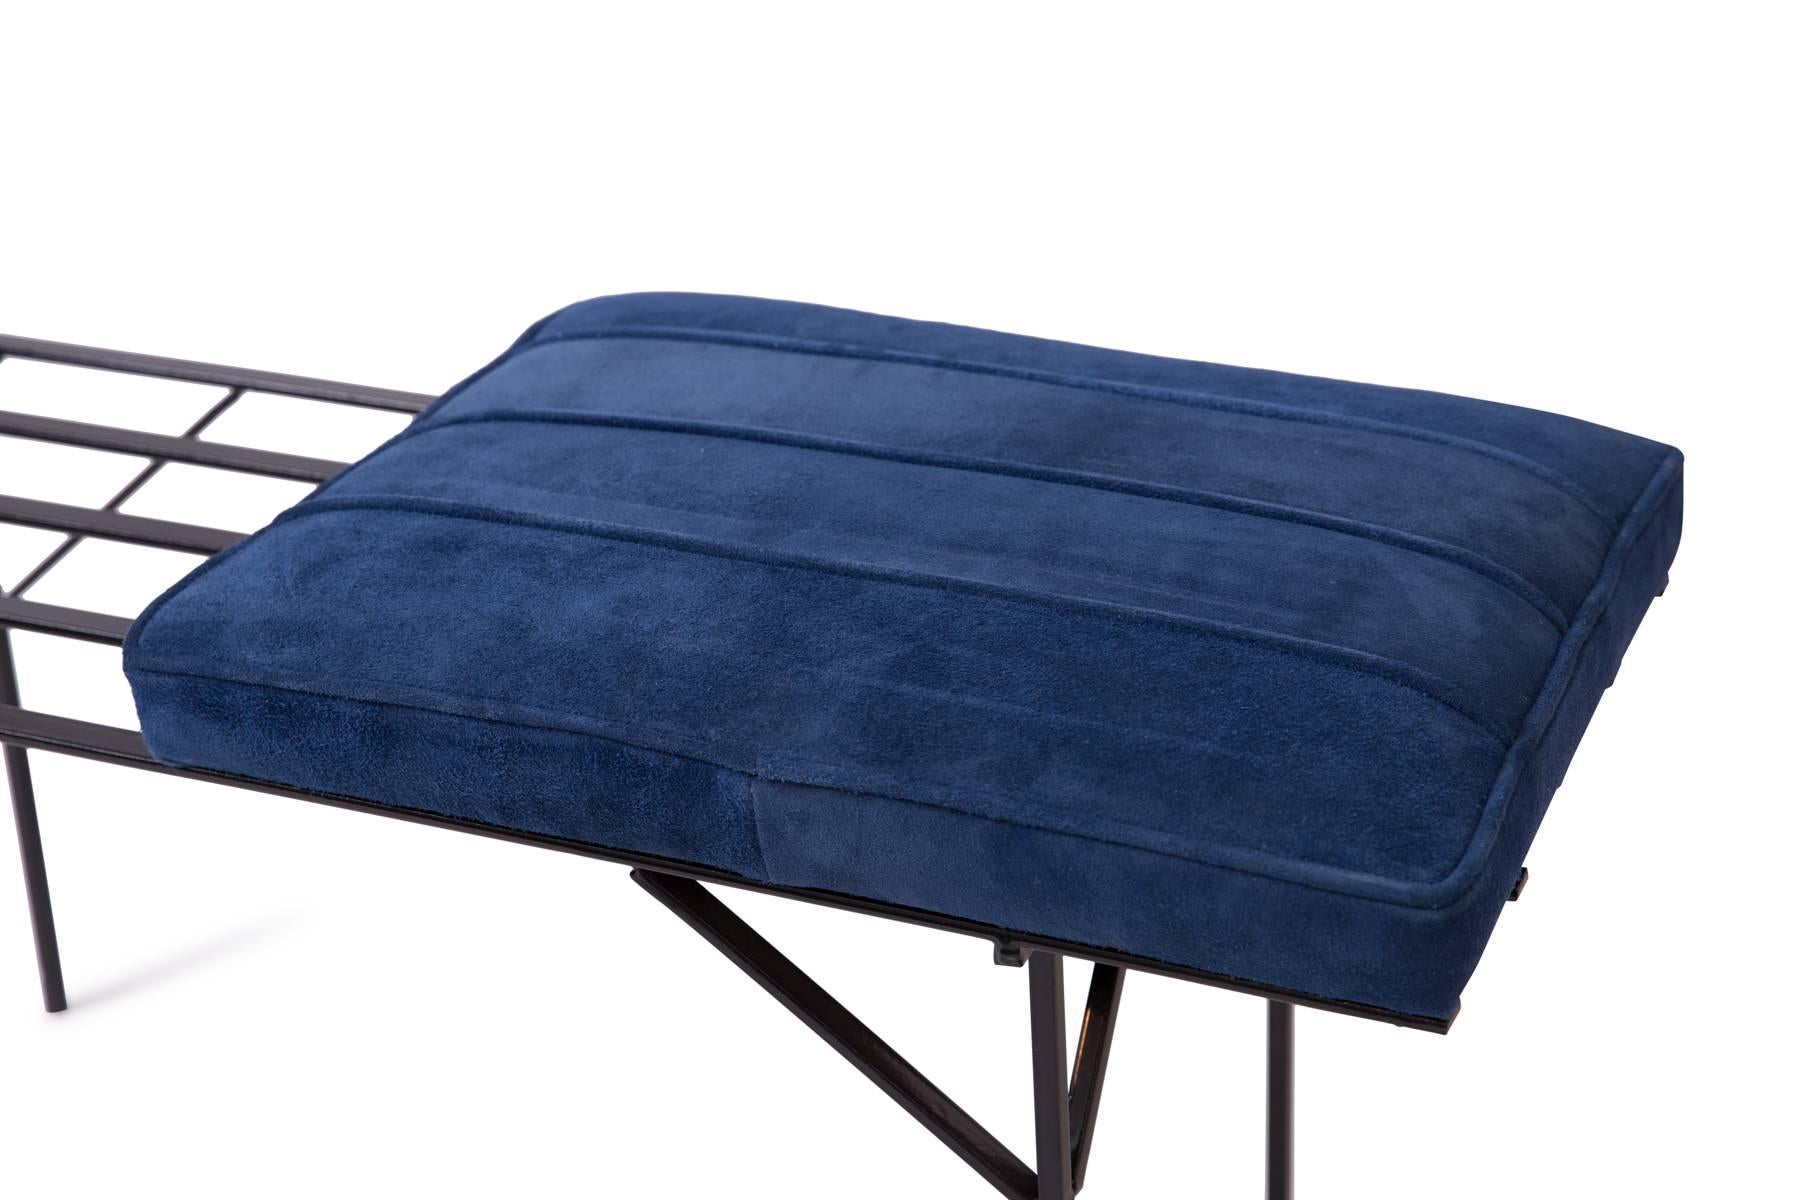 Mid-Century Modern Iron Slat Bench from France in Blue Suede, 1950's For Sale